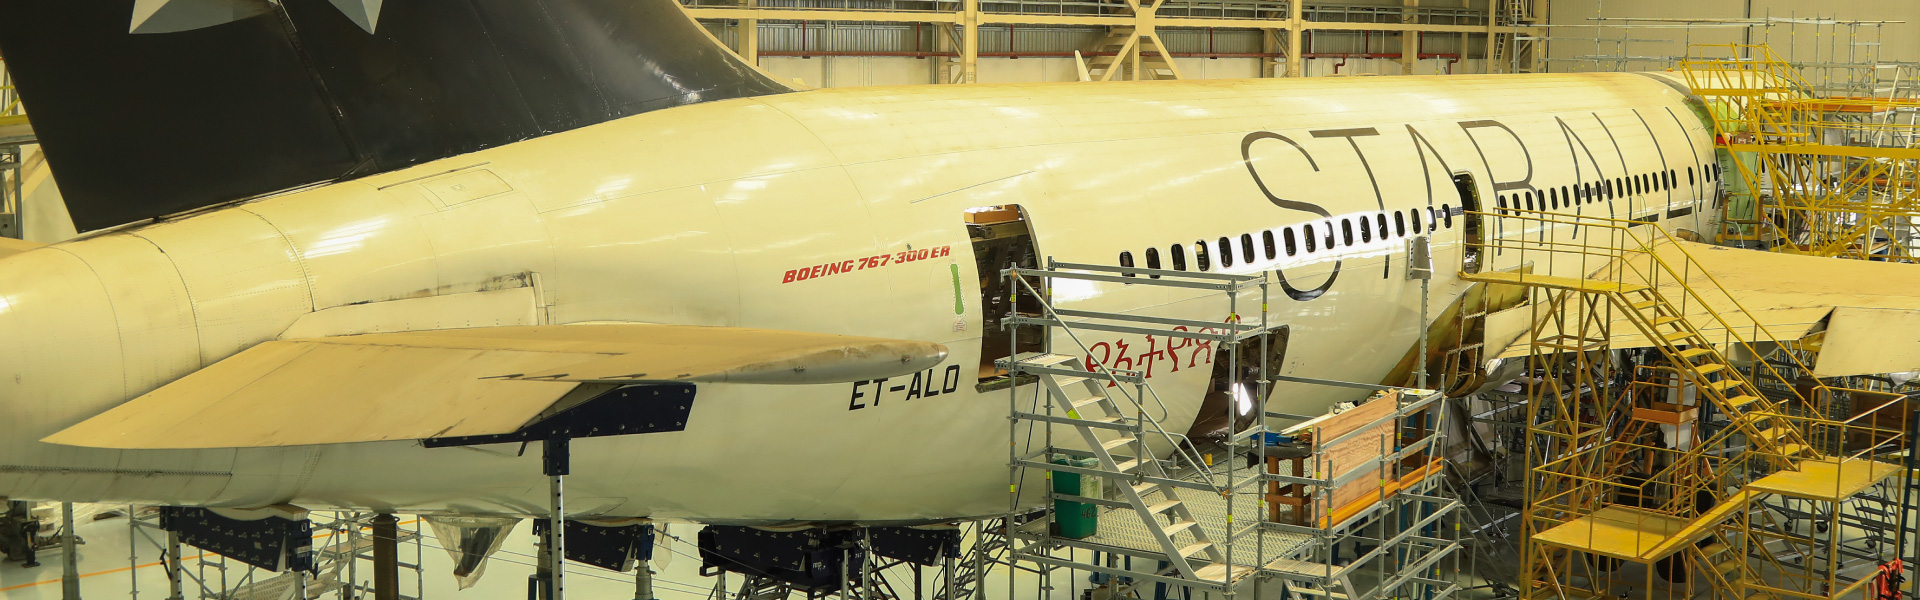 cropped-Ethiopian-Airlines1-1